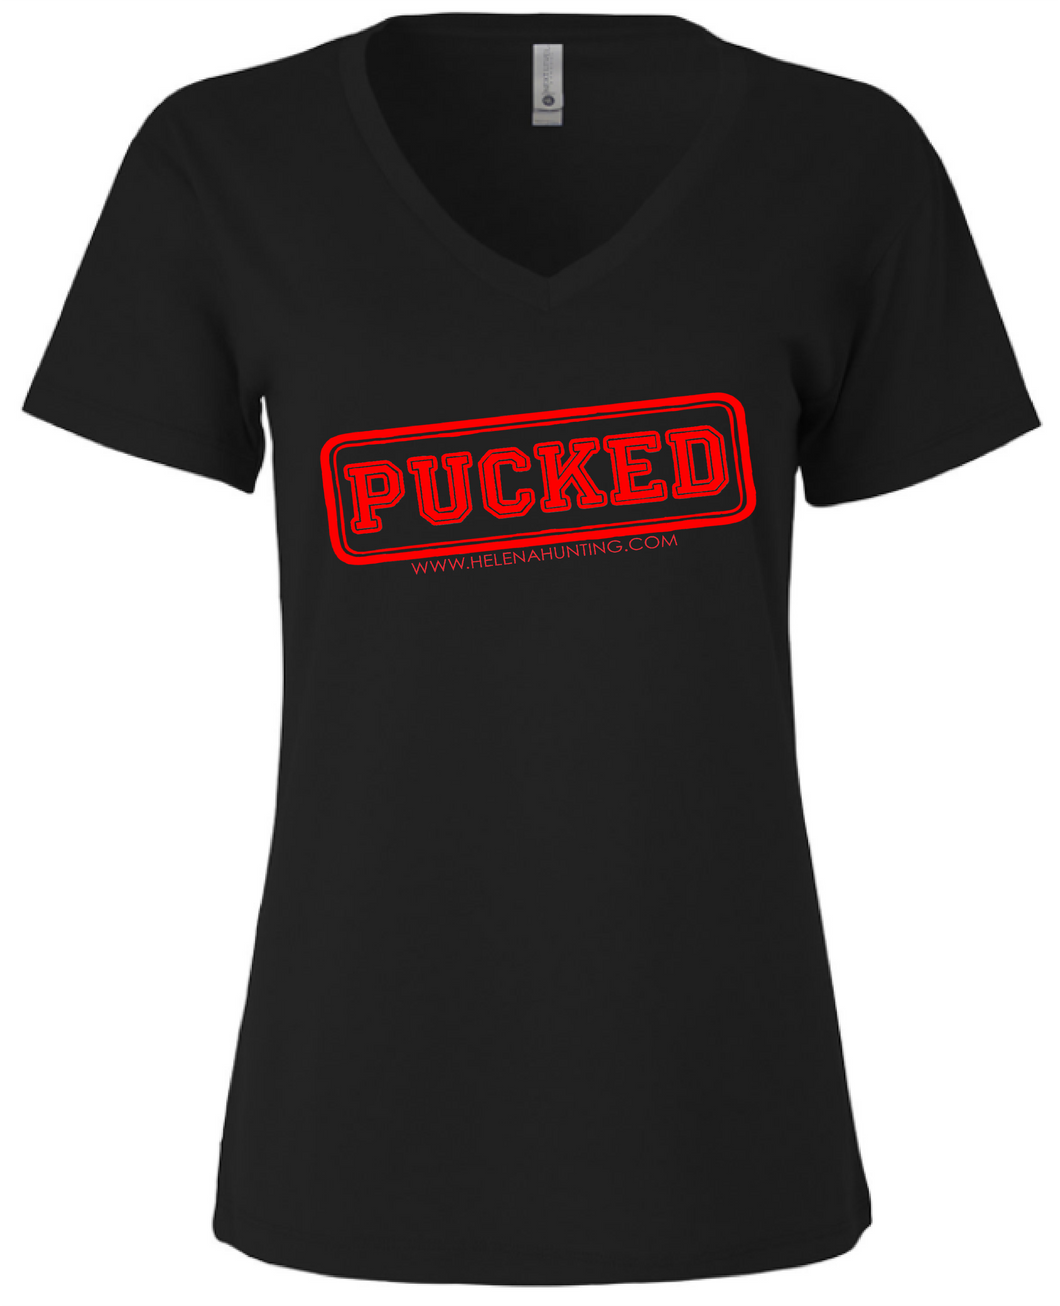 PUCKED Relaxed Fit V-Neck T-Shirt (SIZE XL Only)